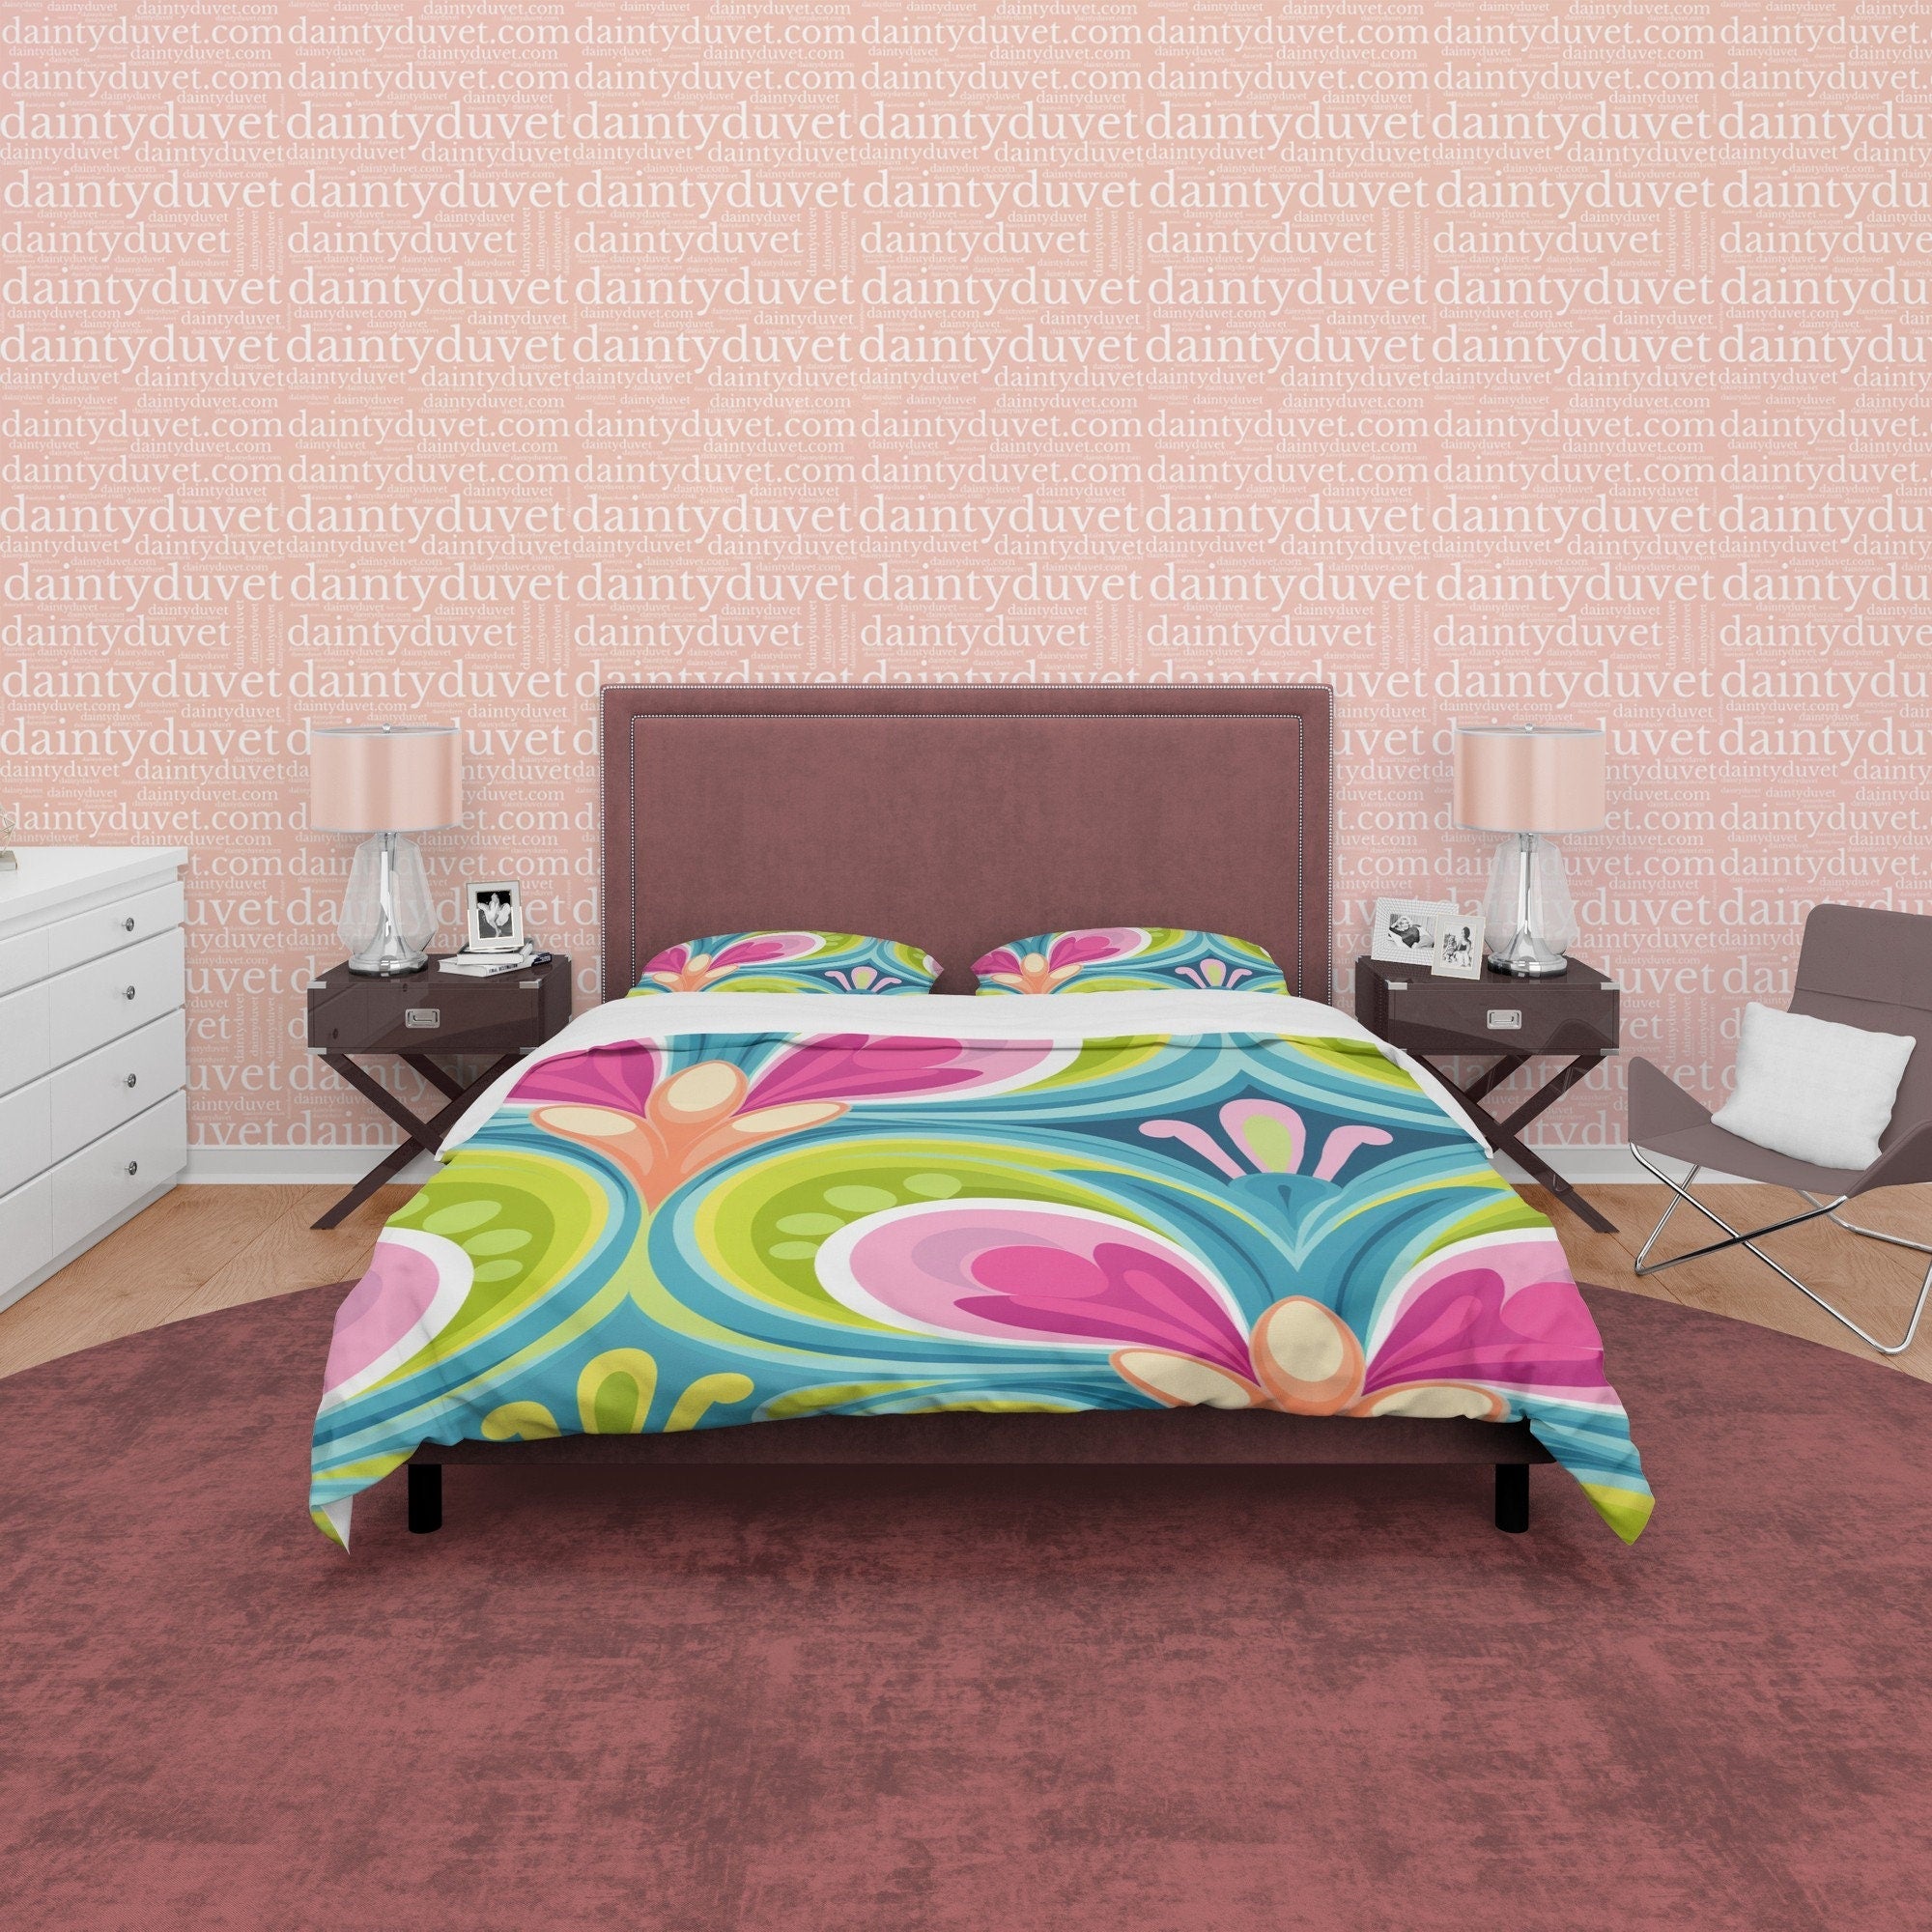 Abstract Heart Like Pattern Boho Bedding Colorful Duvet Cover Bohemian Bedroom Set, Floral Quilt Cover, Aesthetic Bedspread, Unique Bedding